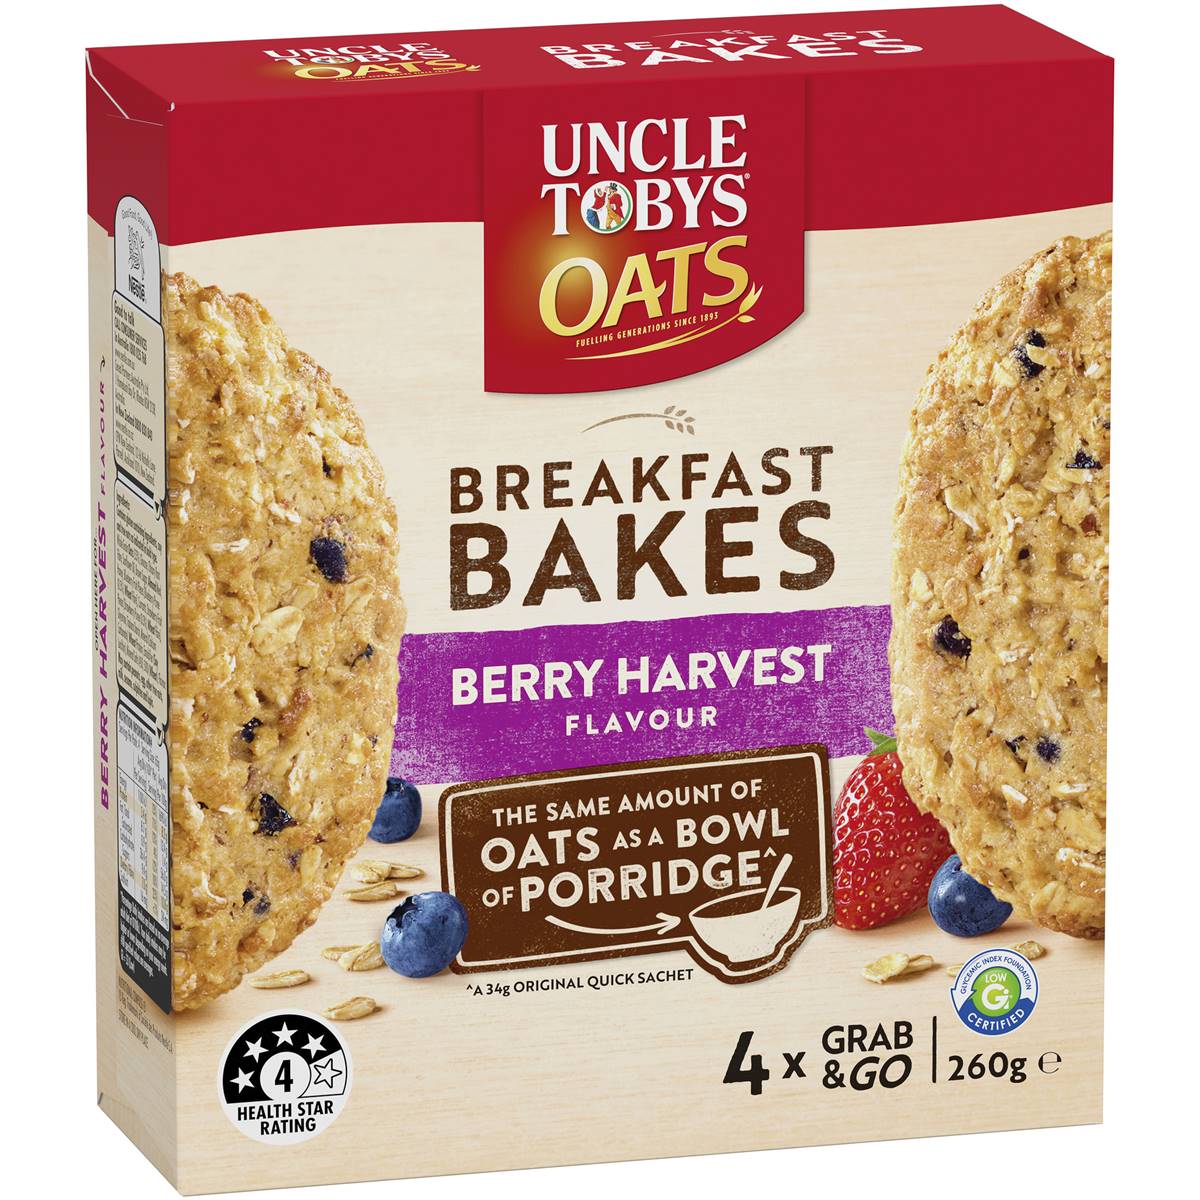 Calories in Uncle Tobys Oats Breakfast Bakes Cereal Bar Berry Harvest